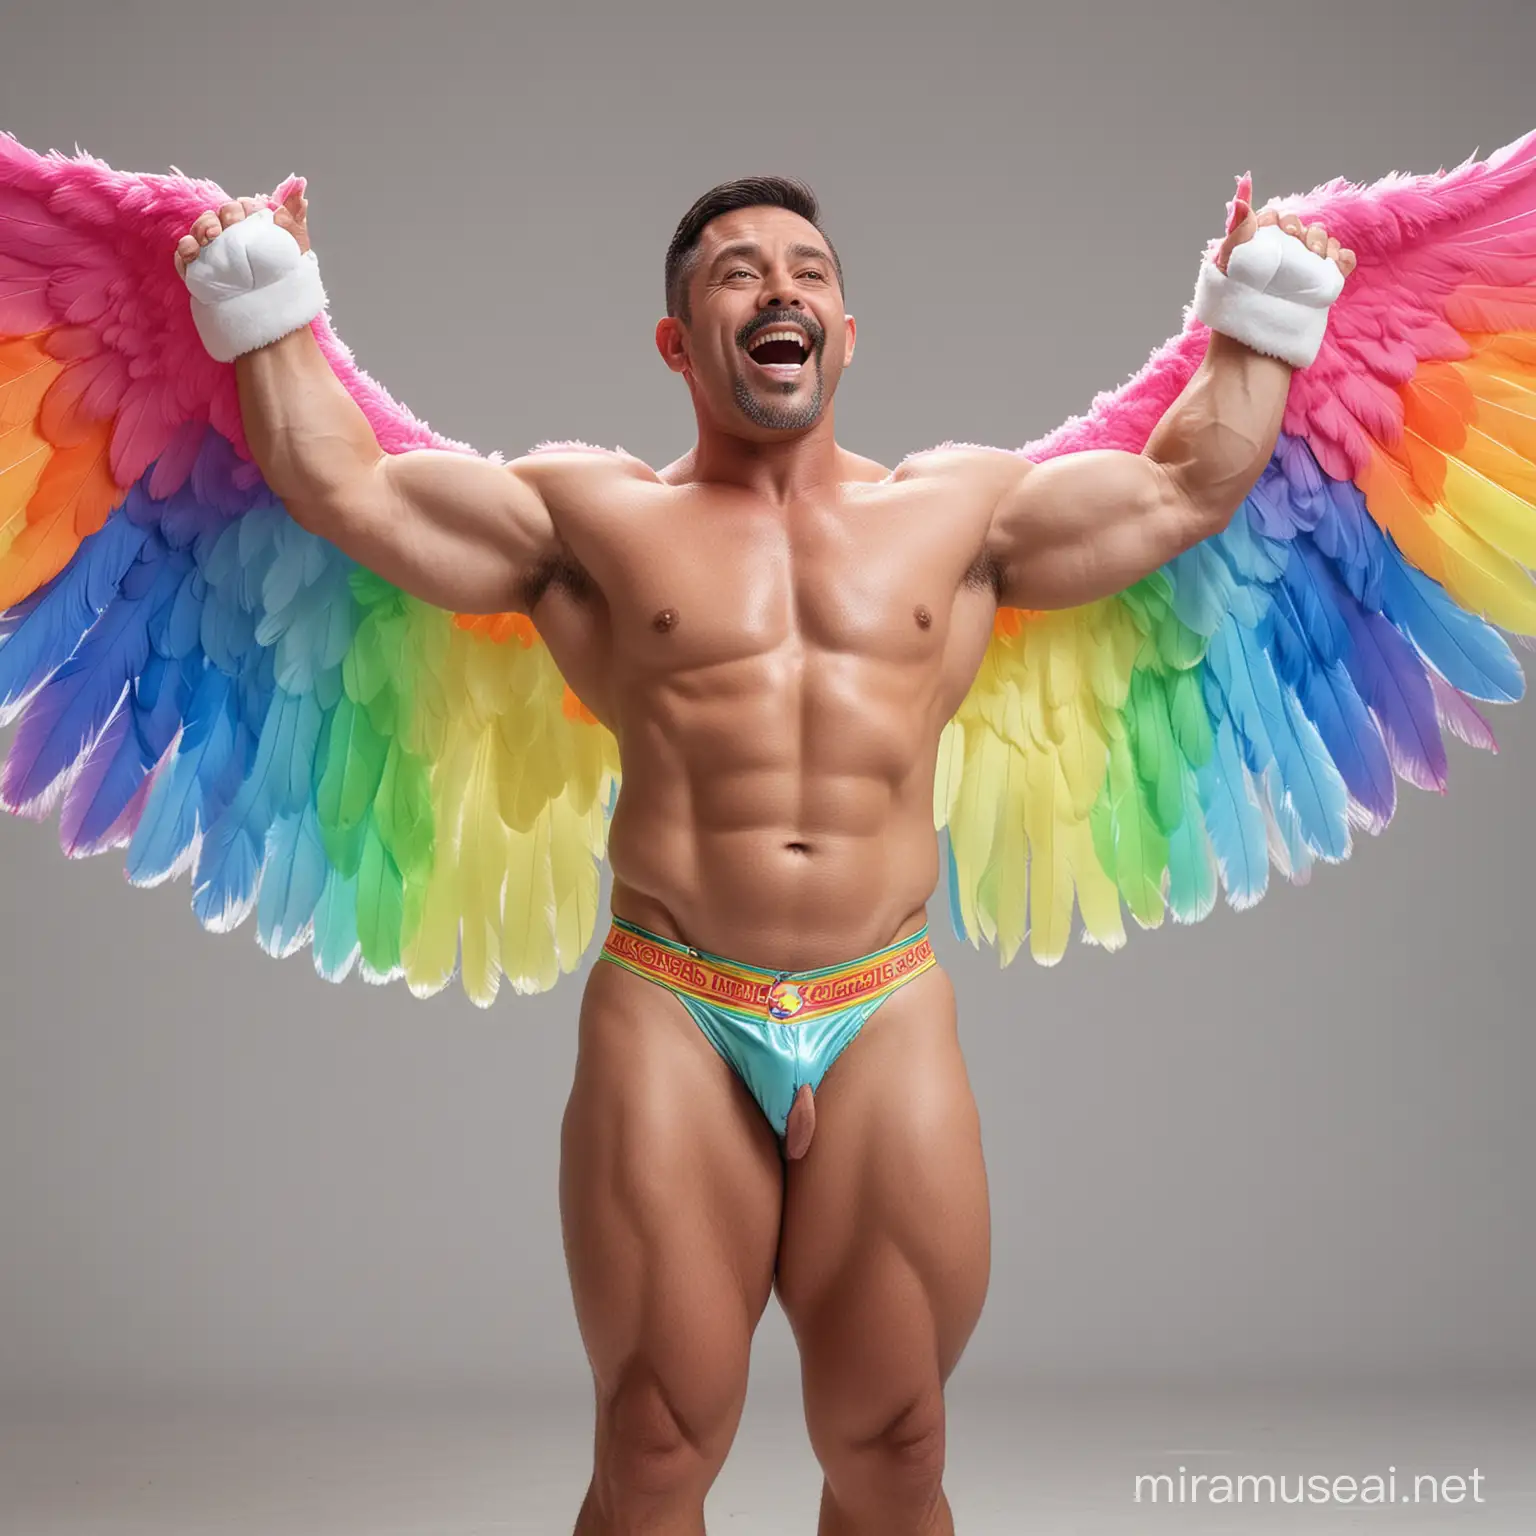 Ultra Chunky IFBB Bodybuilder Daddy Flexing in Rainbow Colored See Through Eagle Wings Jacket and Doraemon Short Shorts